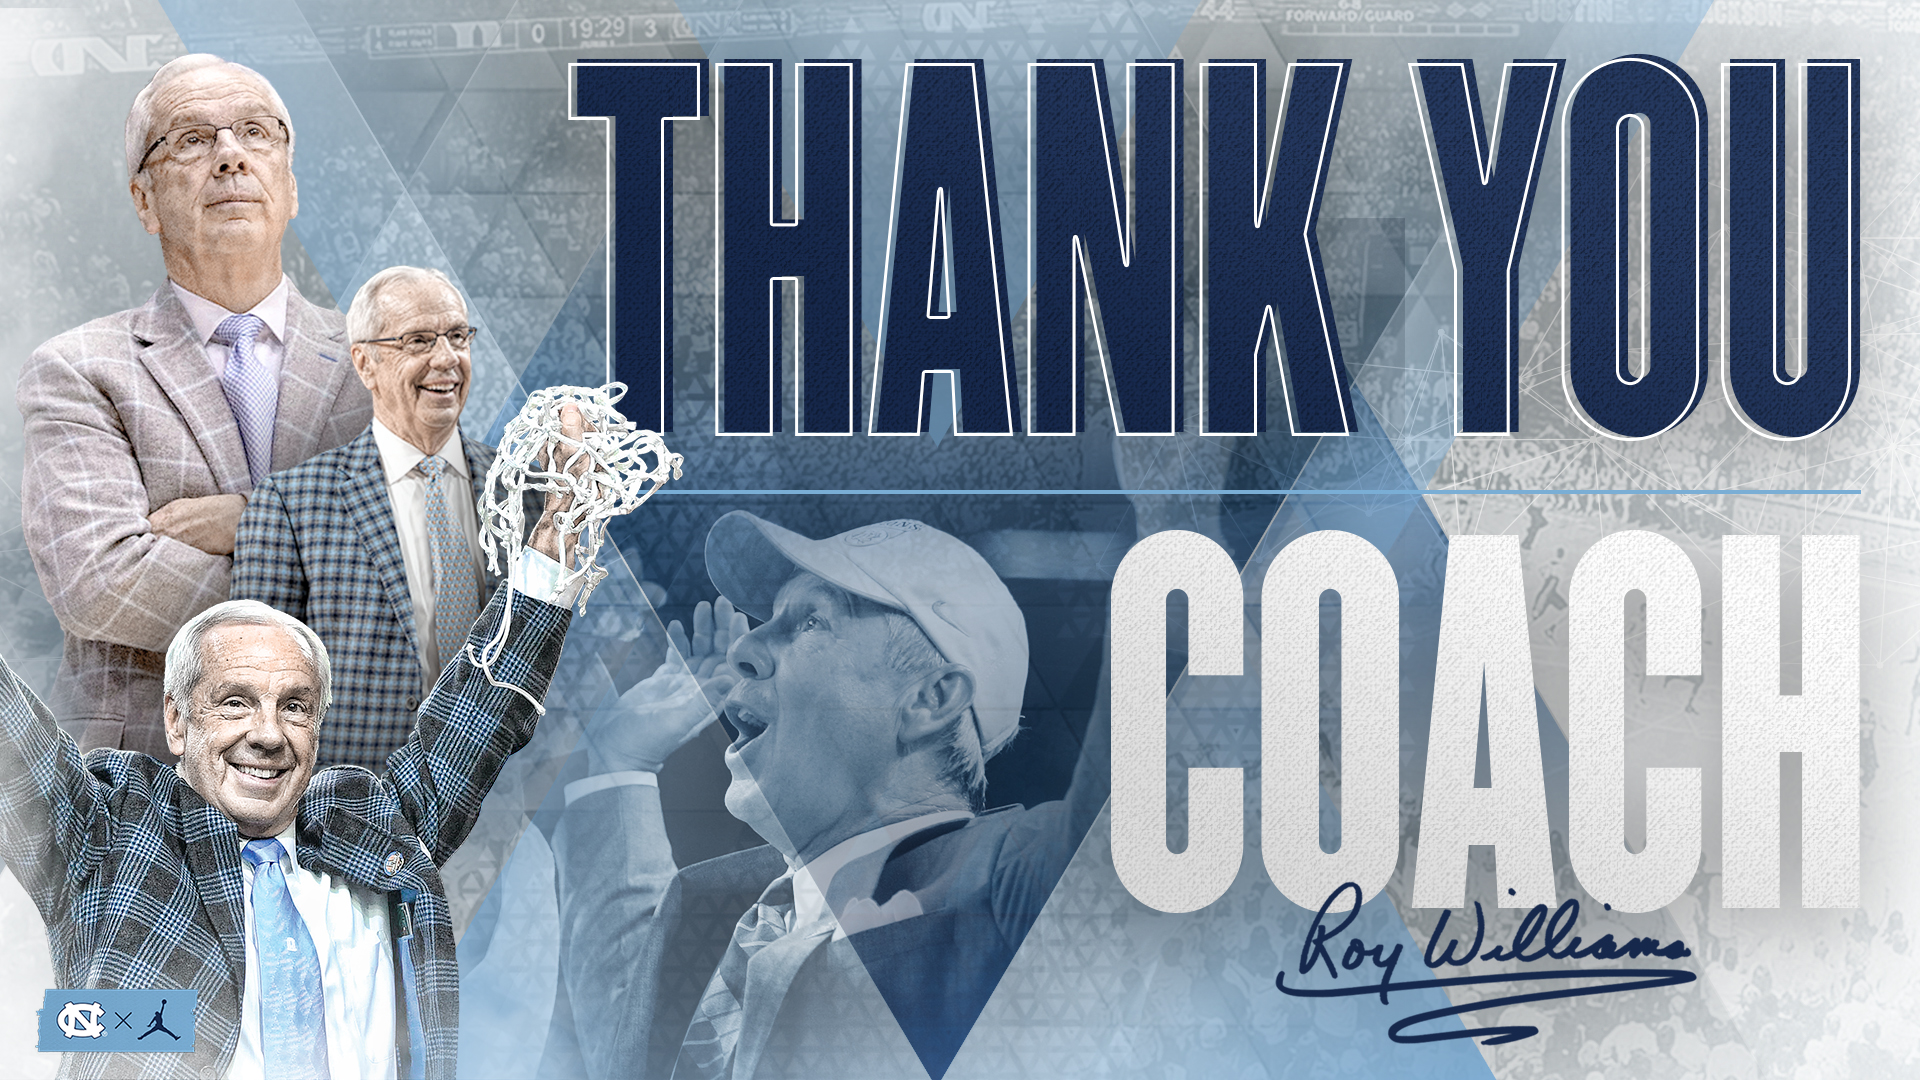 Roy Williams retires from coaching after 48 years | UNC-Chapel Hill